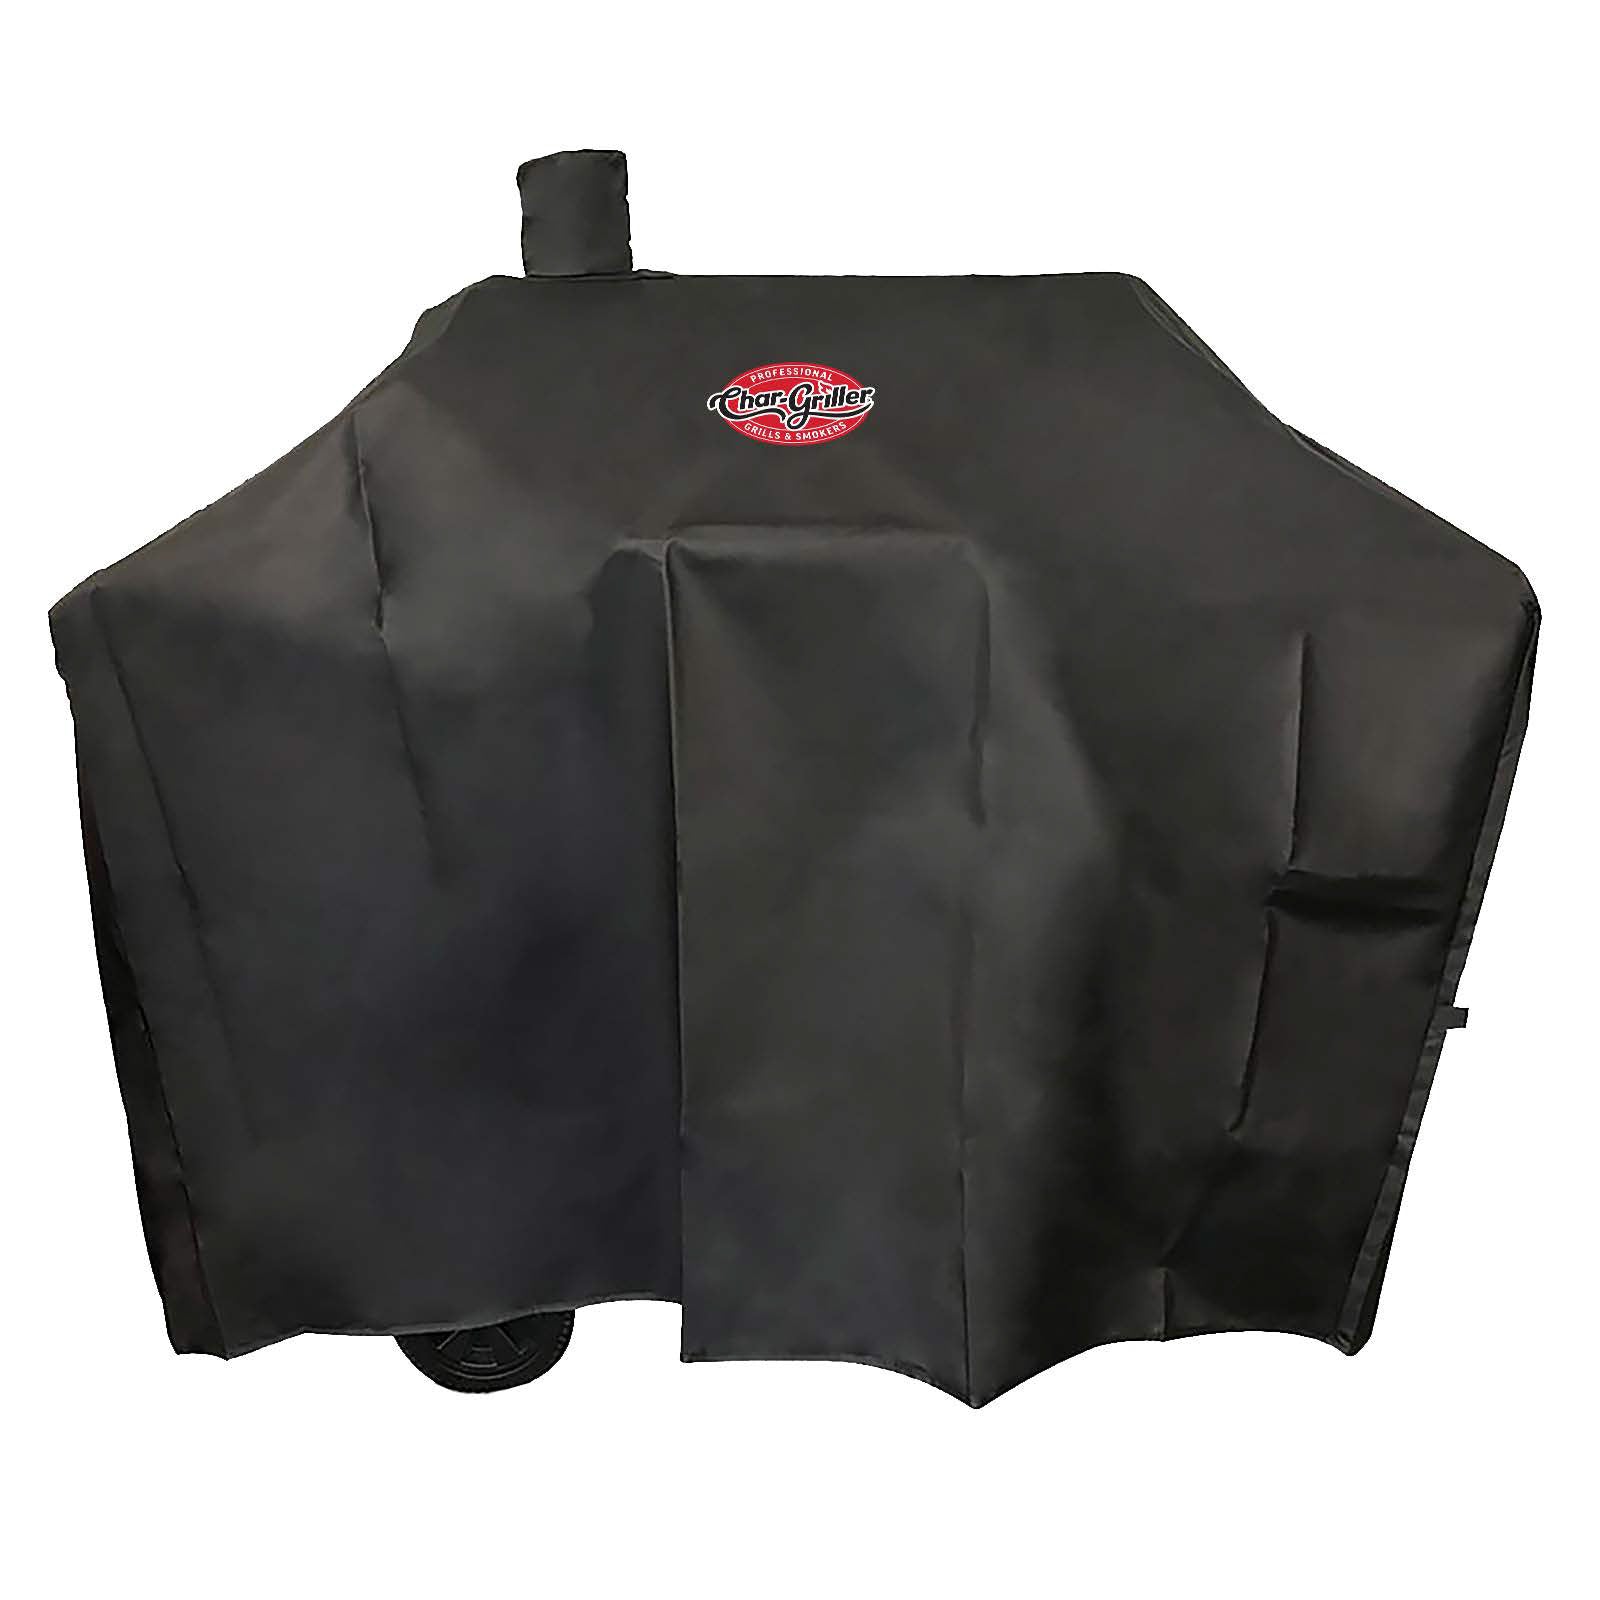 Traditional Charcoal Grill Cover